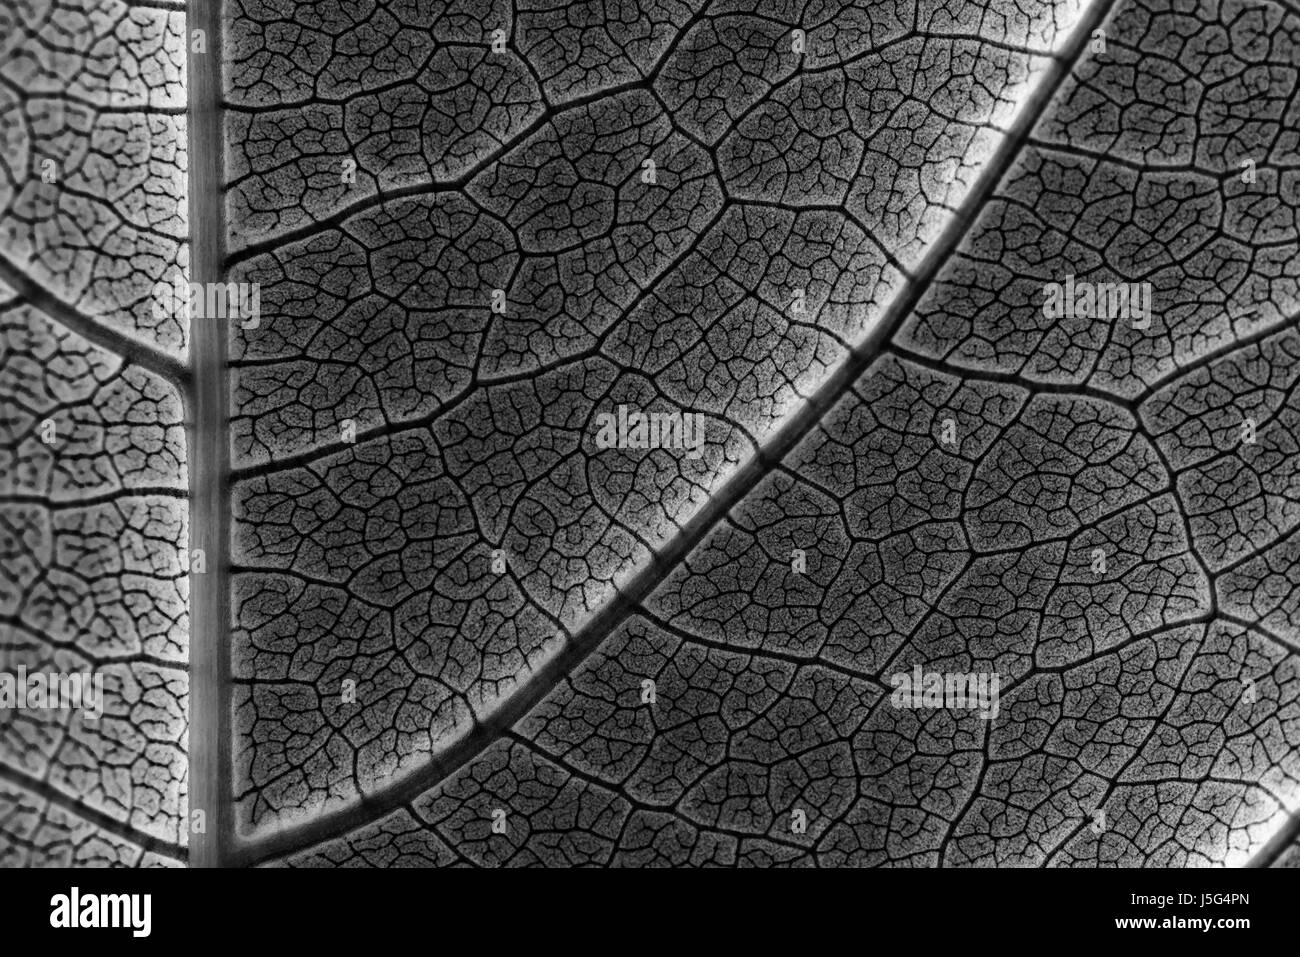 Infrared Leaf Texture With Visible Stomata Covering The Outer Epidermis Layer Stock Photo